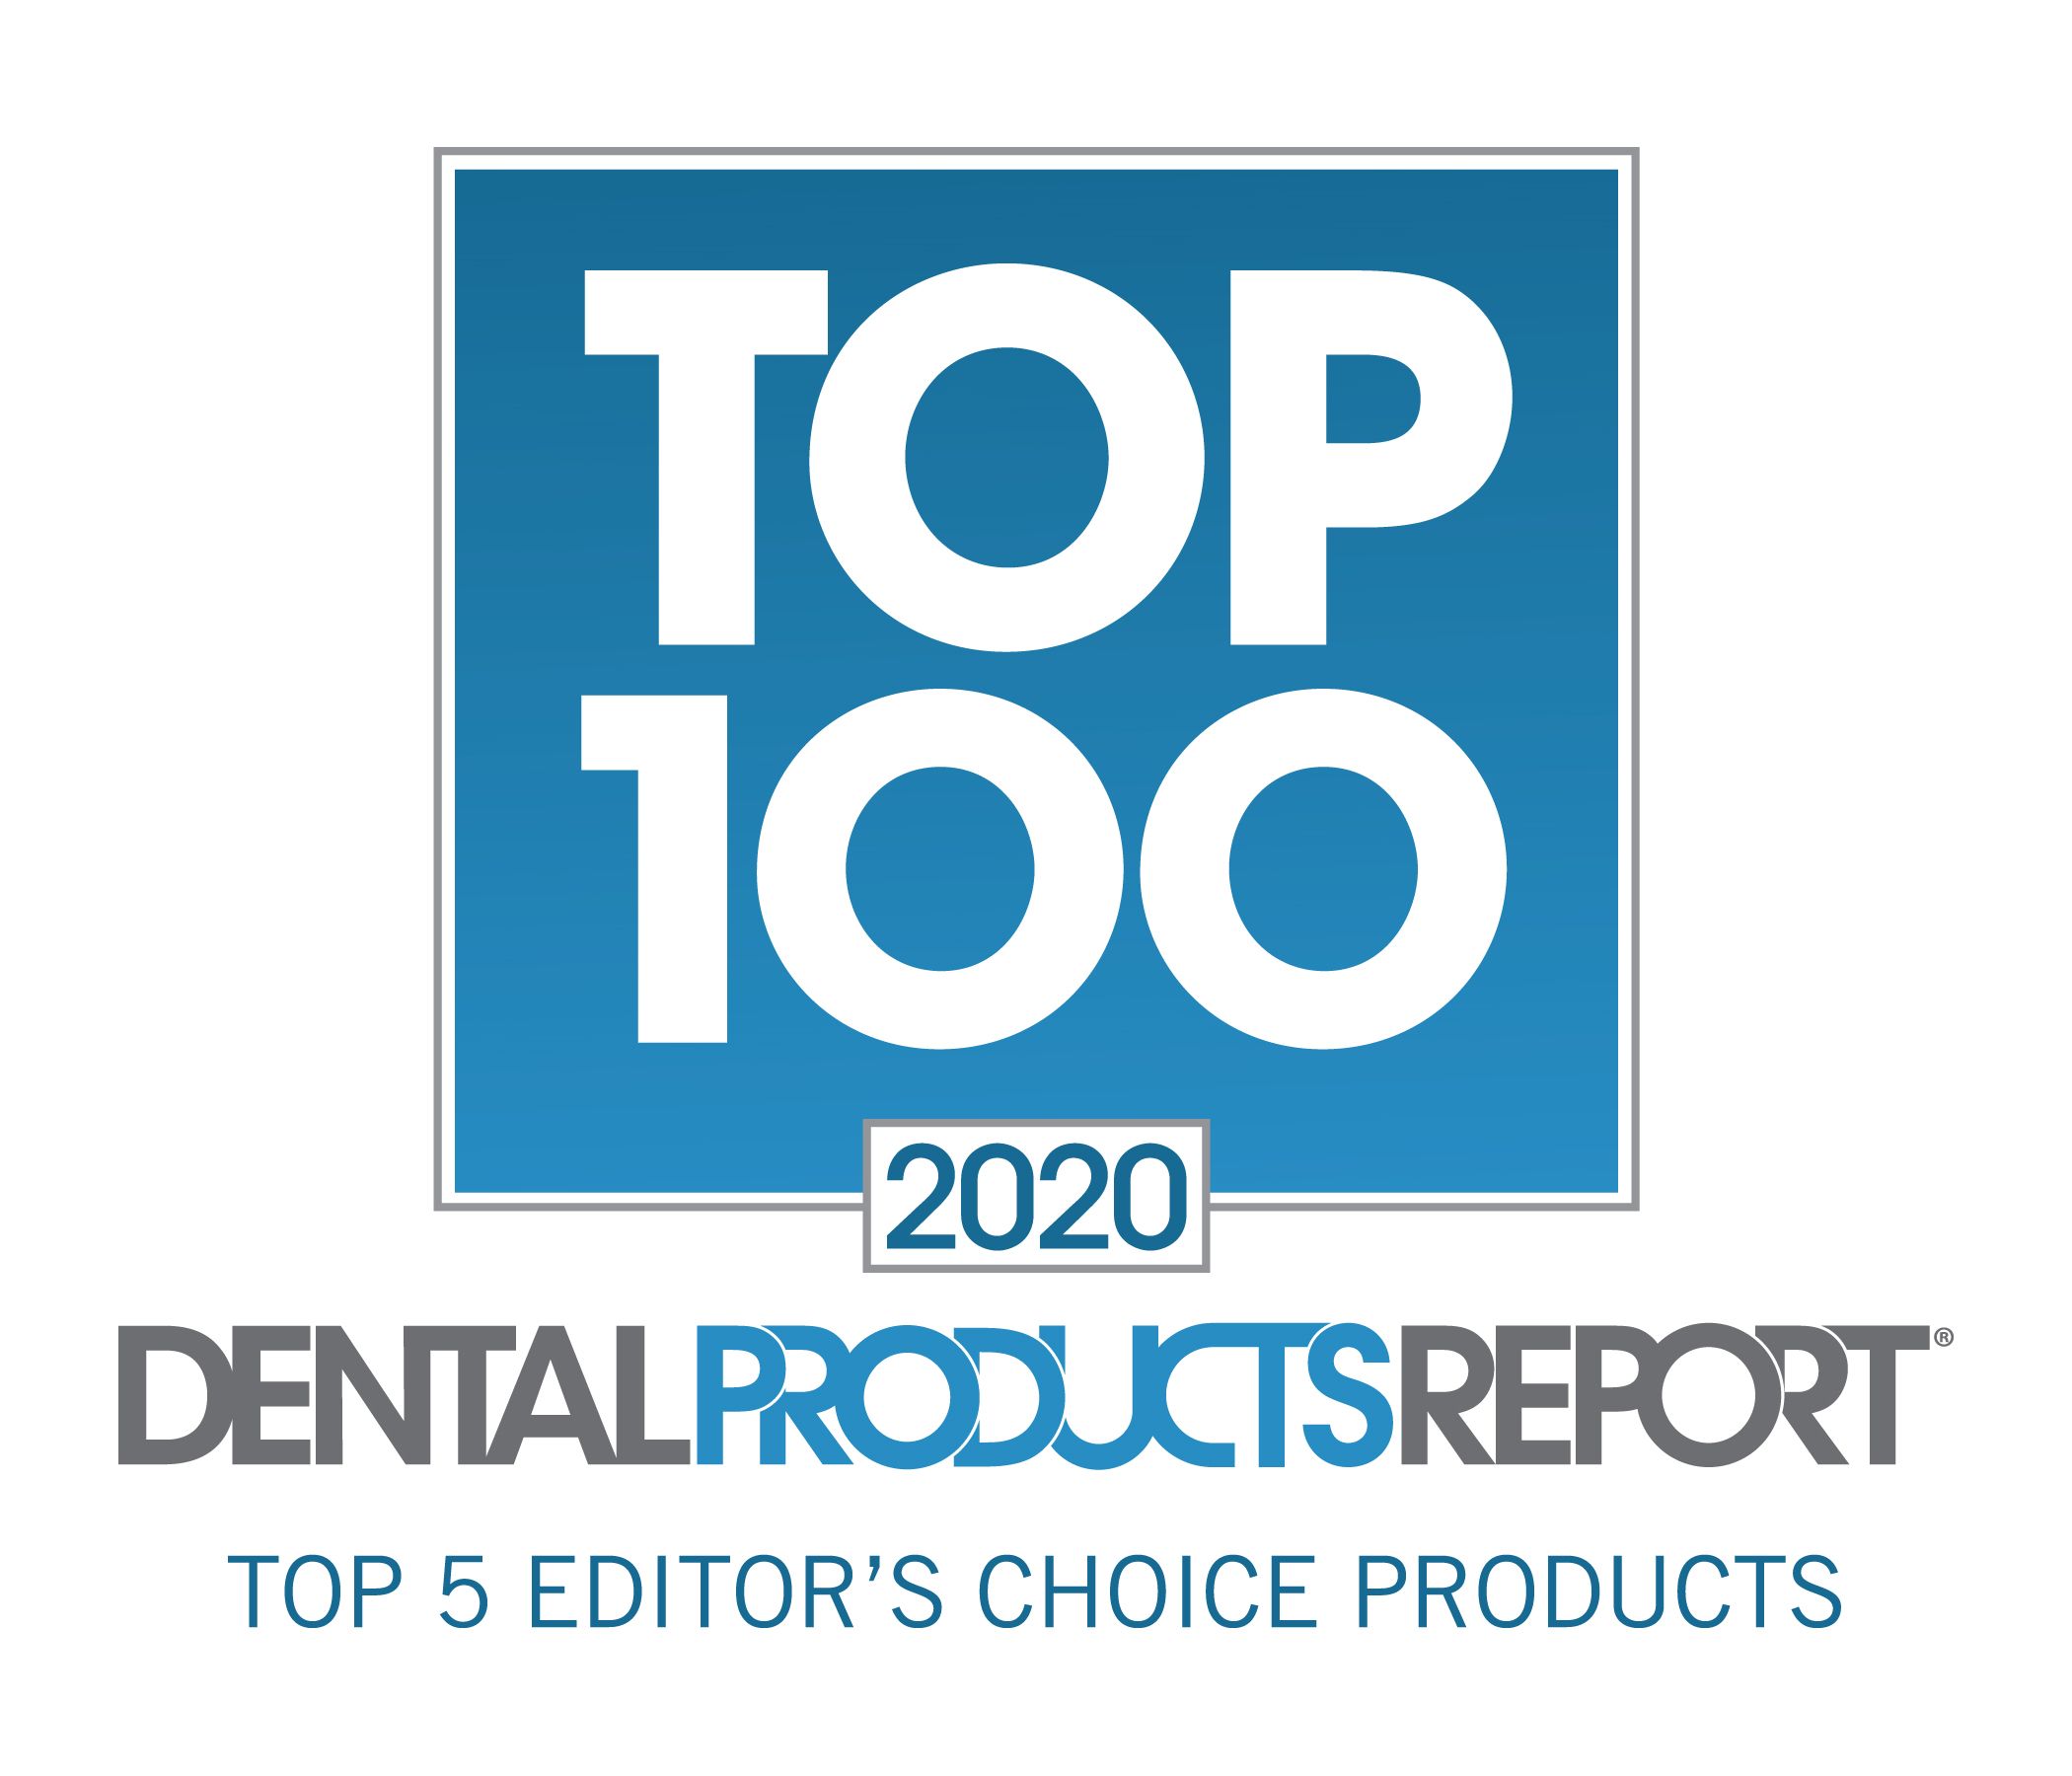 Top 5 Editor's Choice Products of 2020